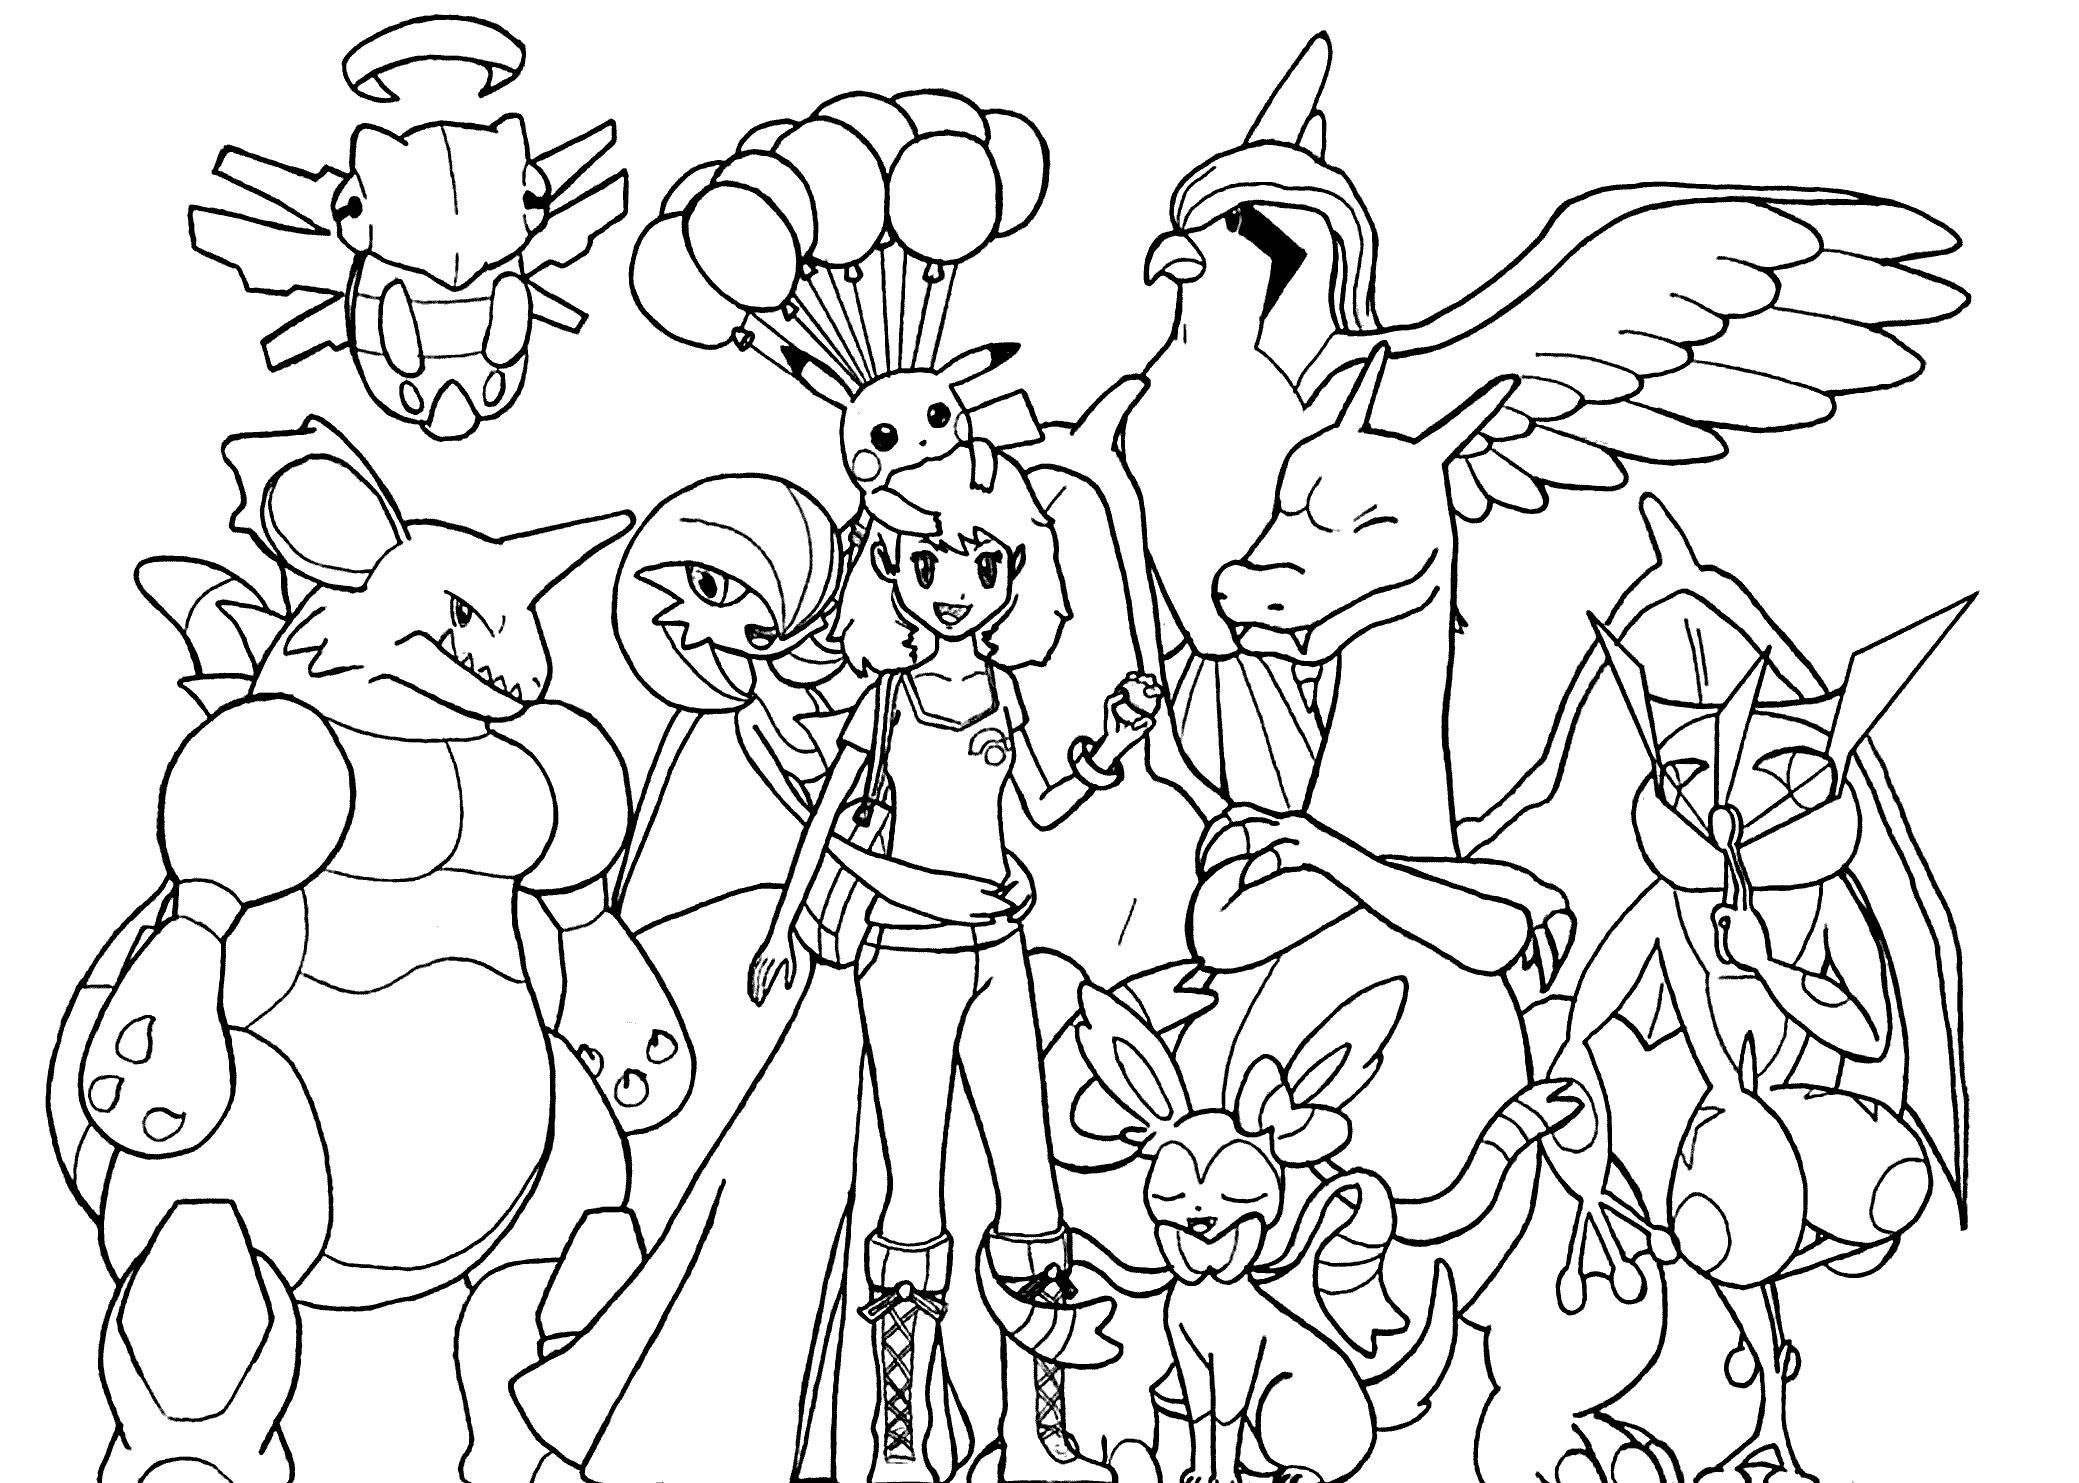 Simple Pokemon coloring page to print and color for free